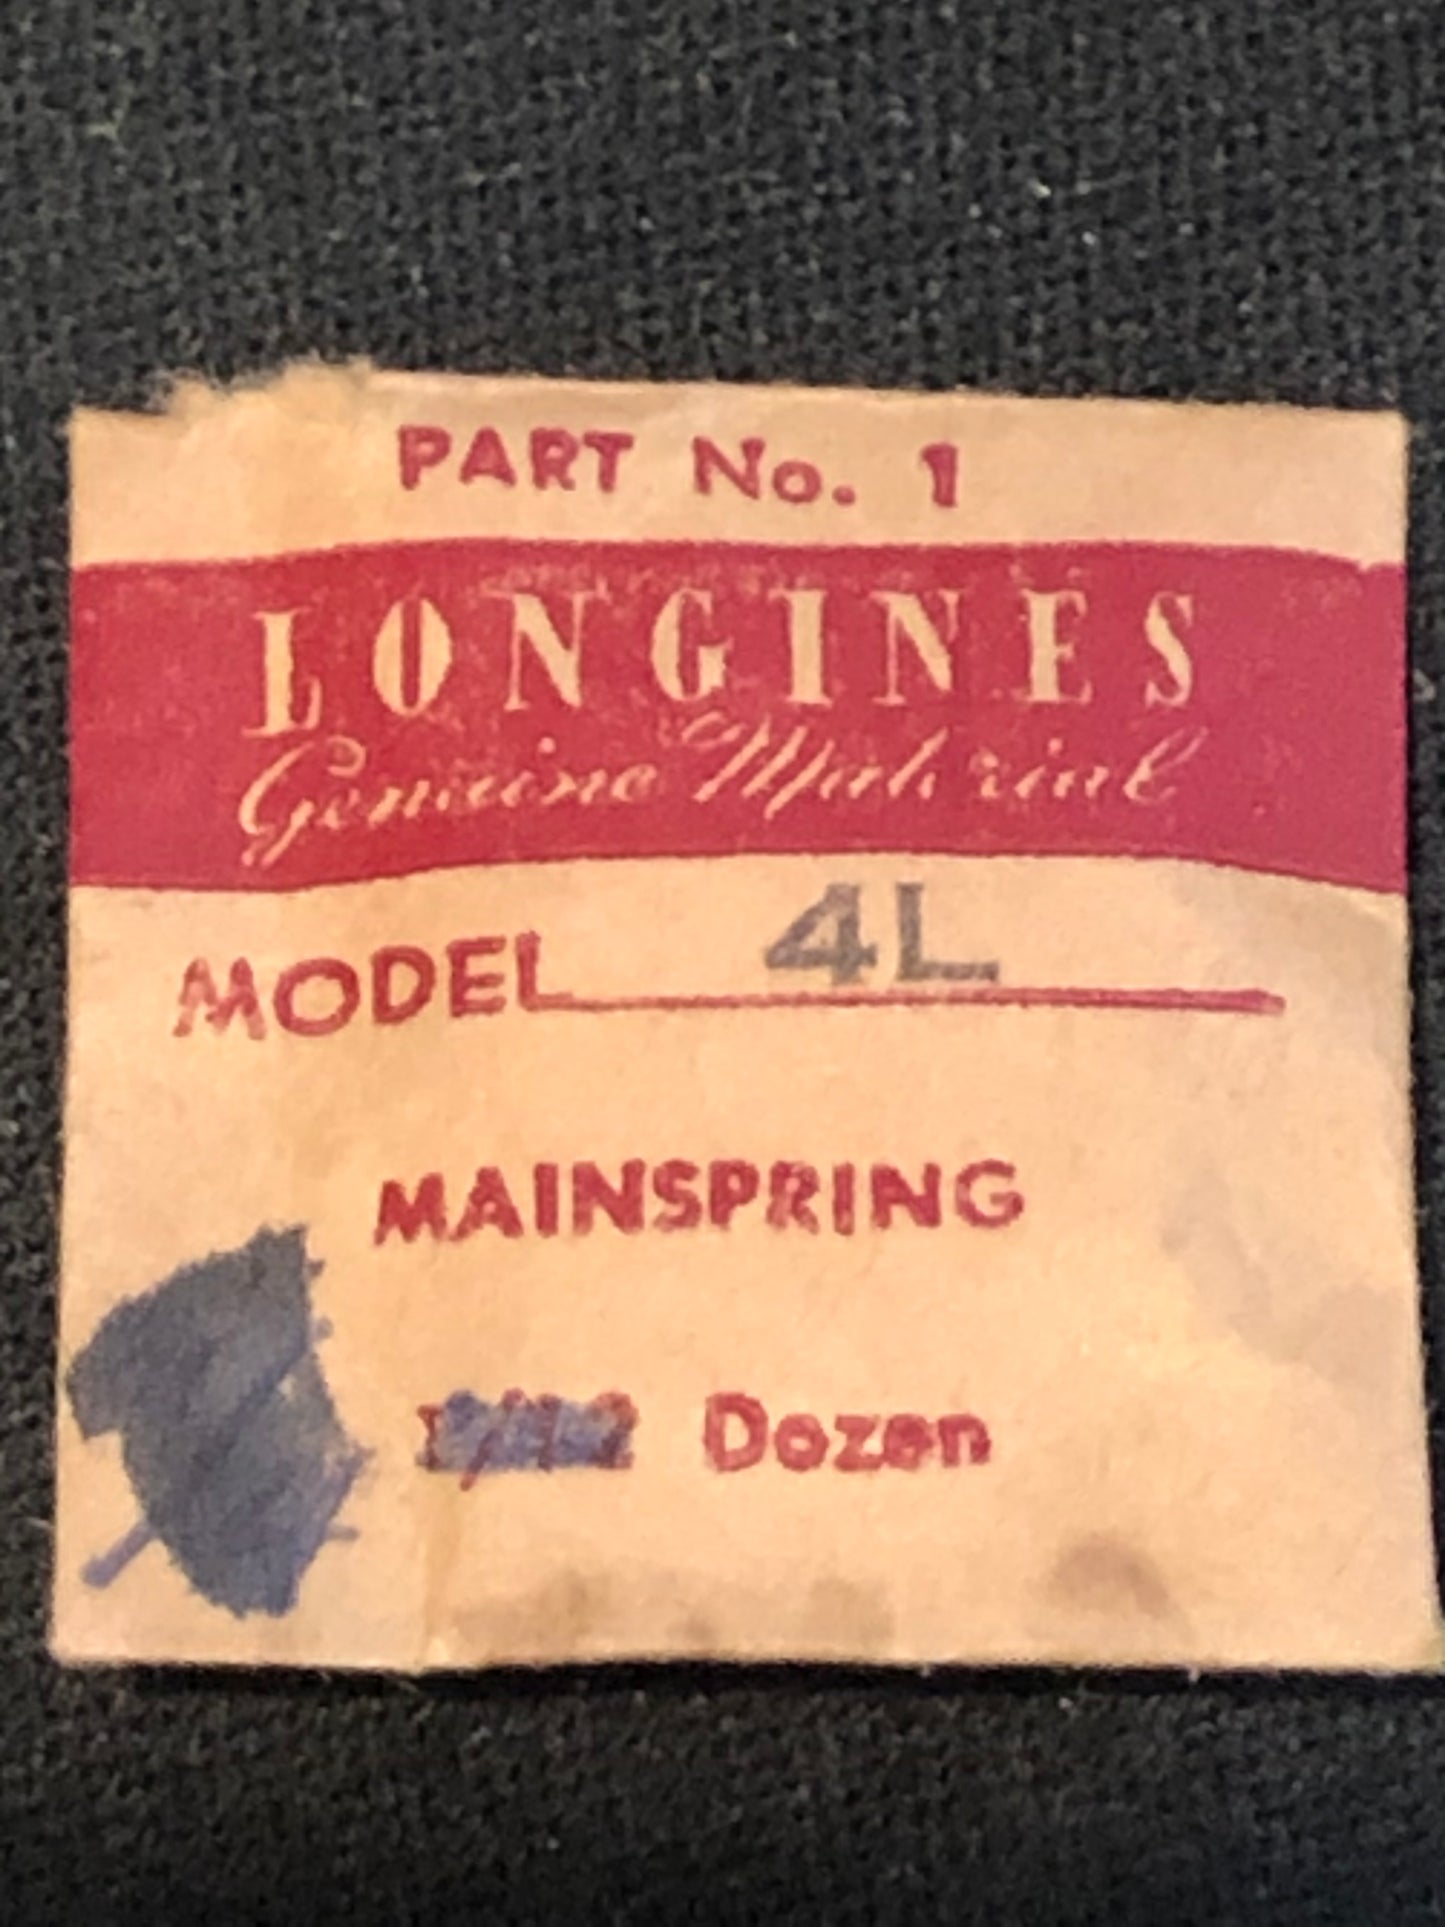 Longines Factory Mainspring for caliber 4L - Steel